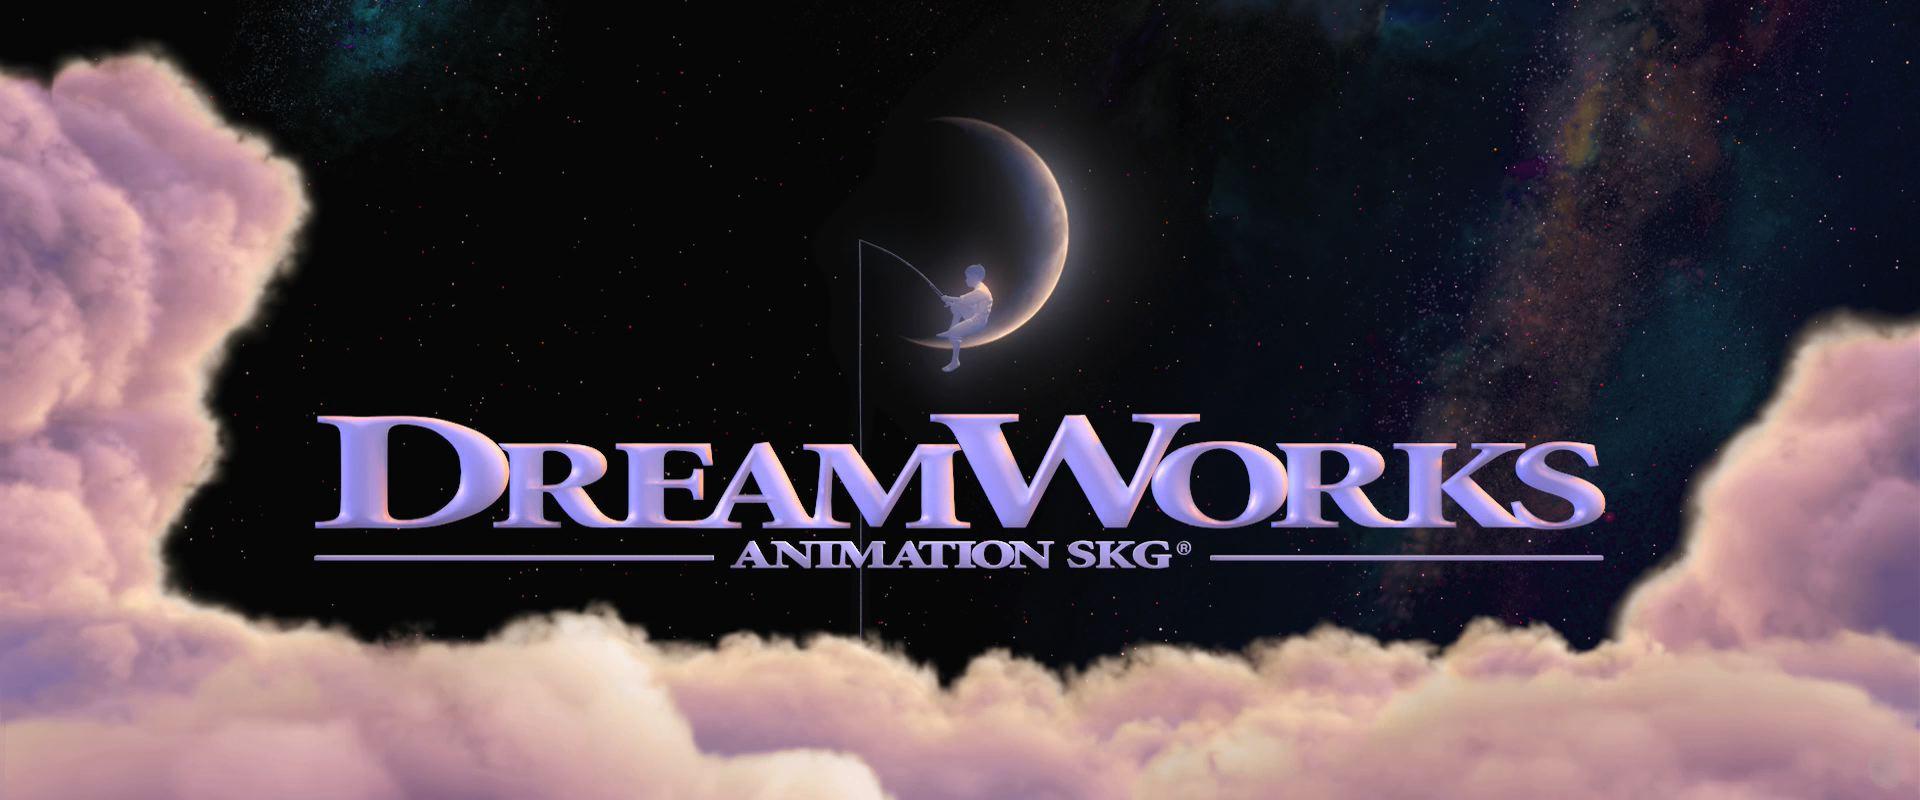 Dreamworks Wallpaper Image & Picture